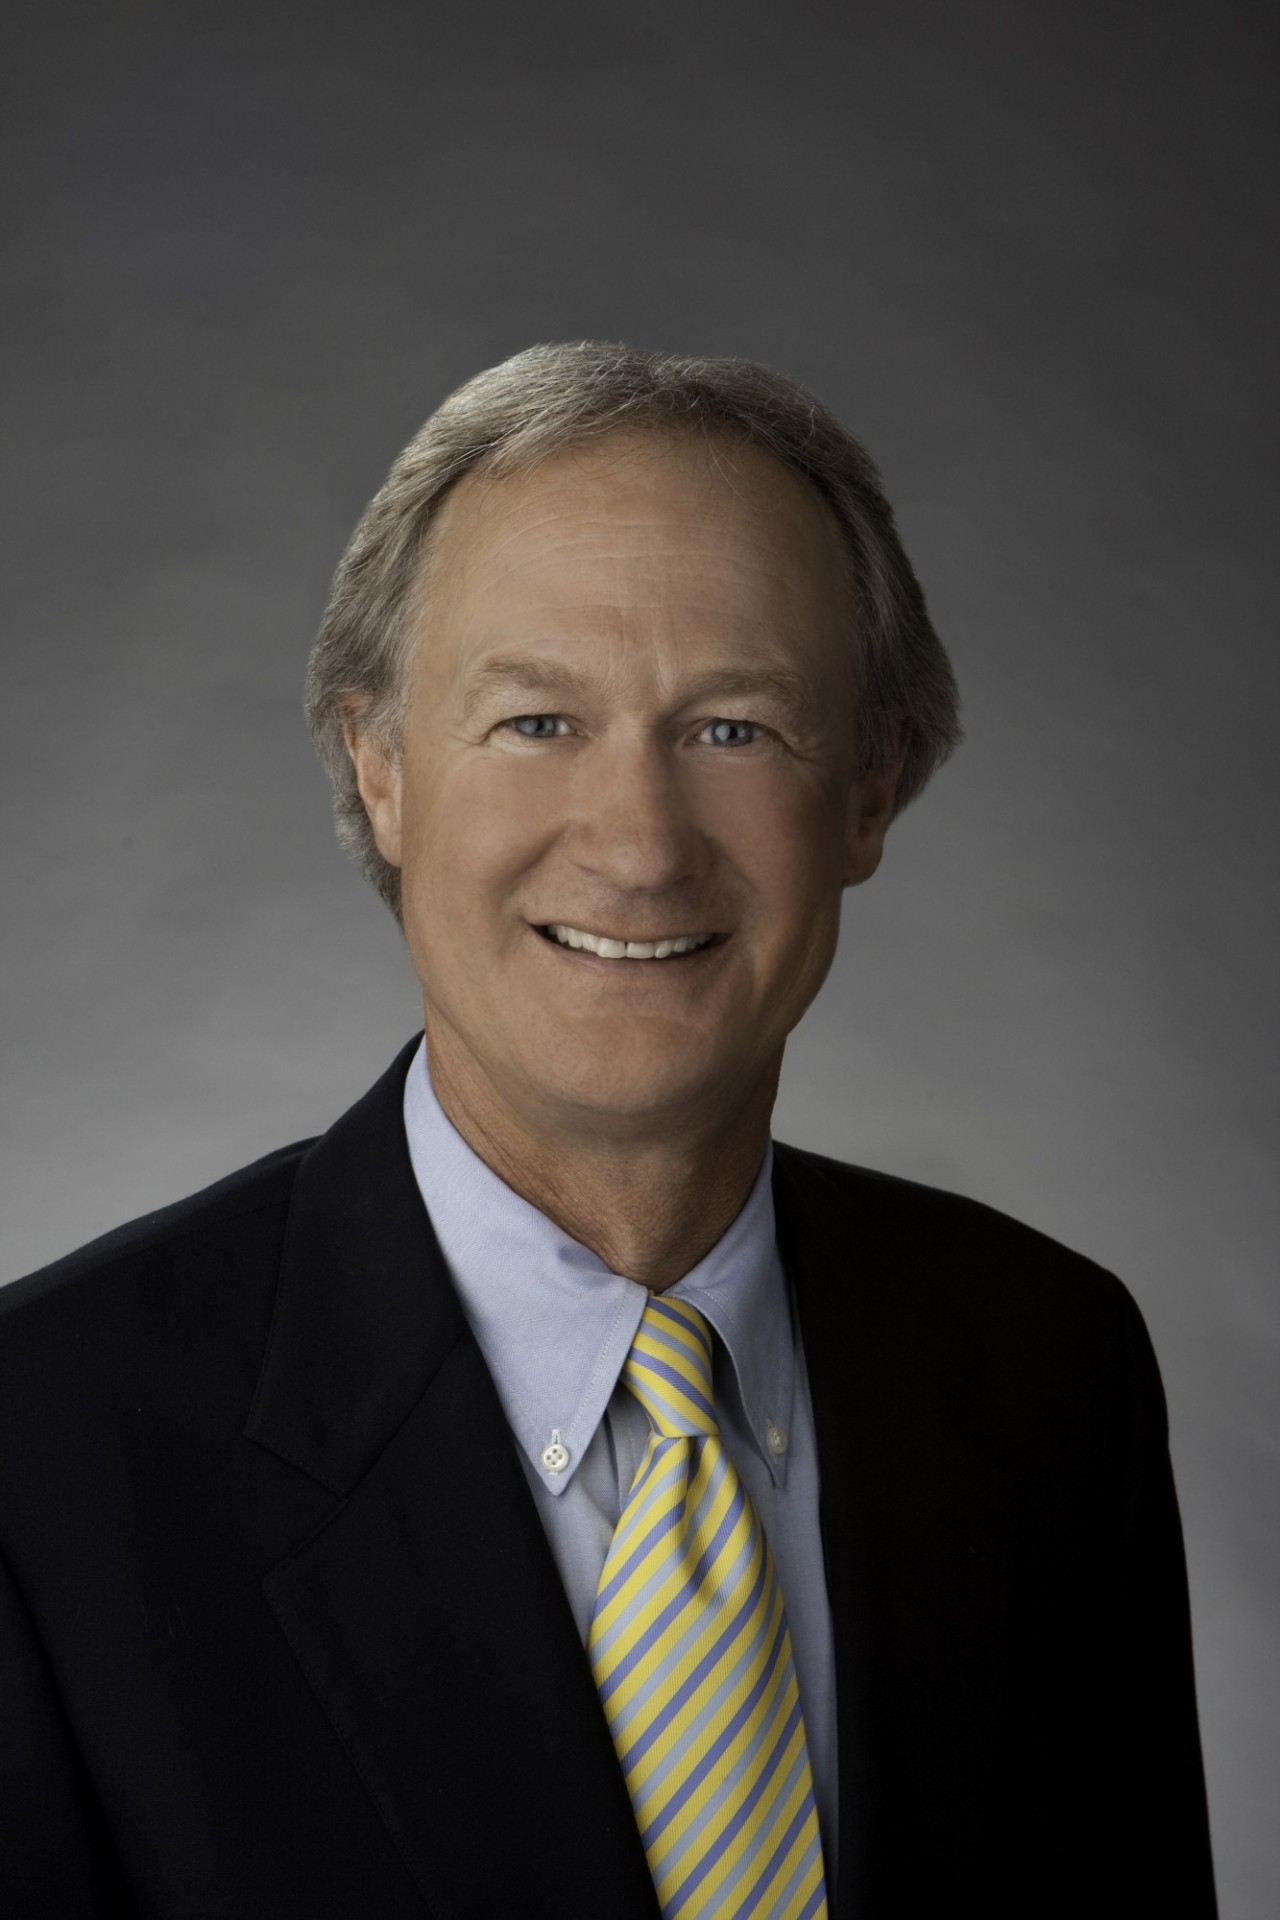 Lincoln D. Chafee